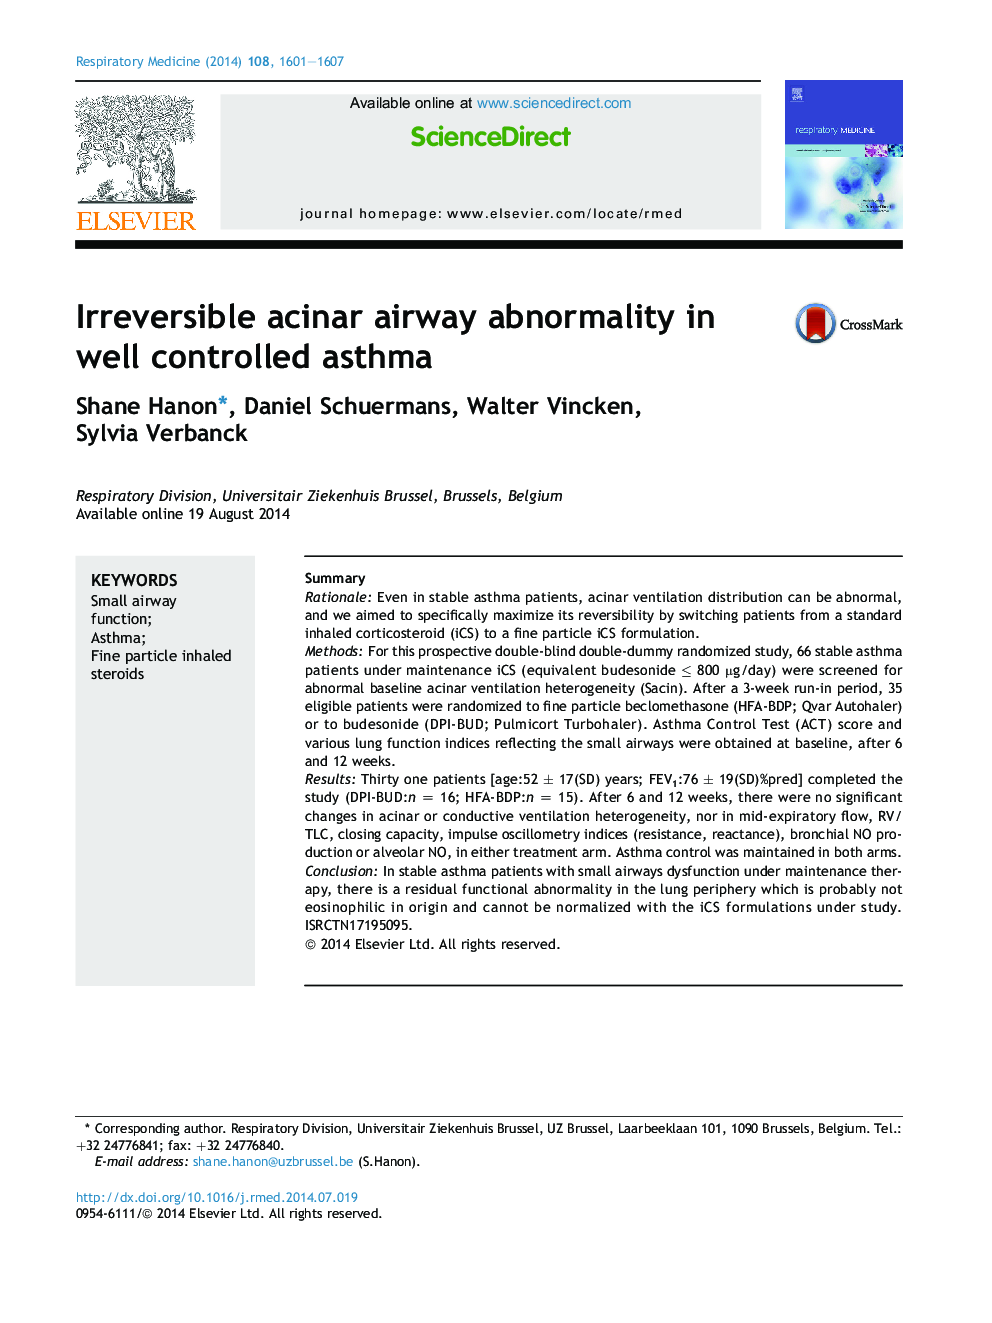 Irreversible acinar airway abnormality in well controlled asthma